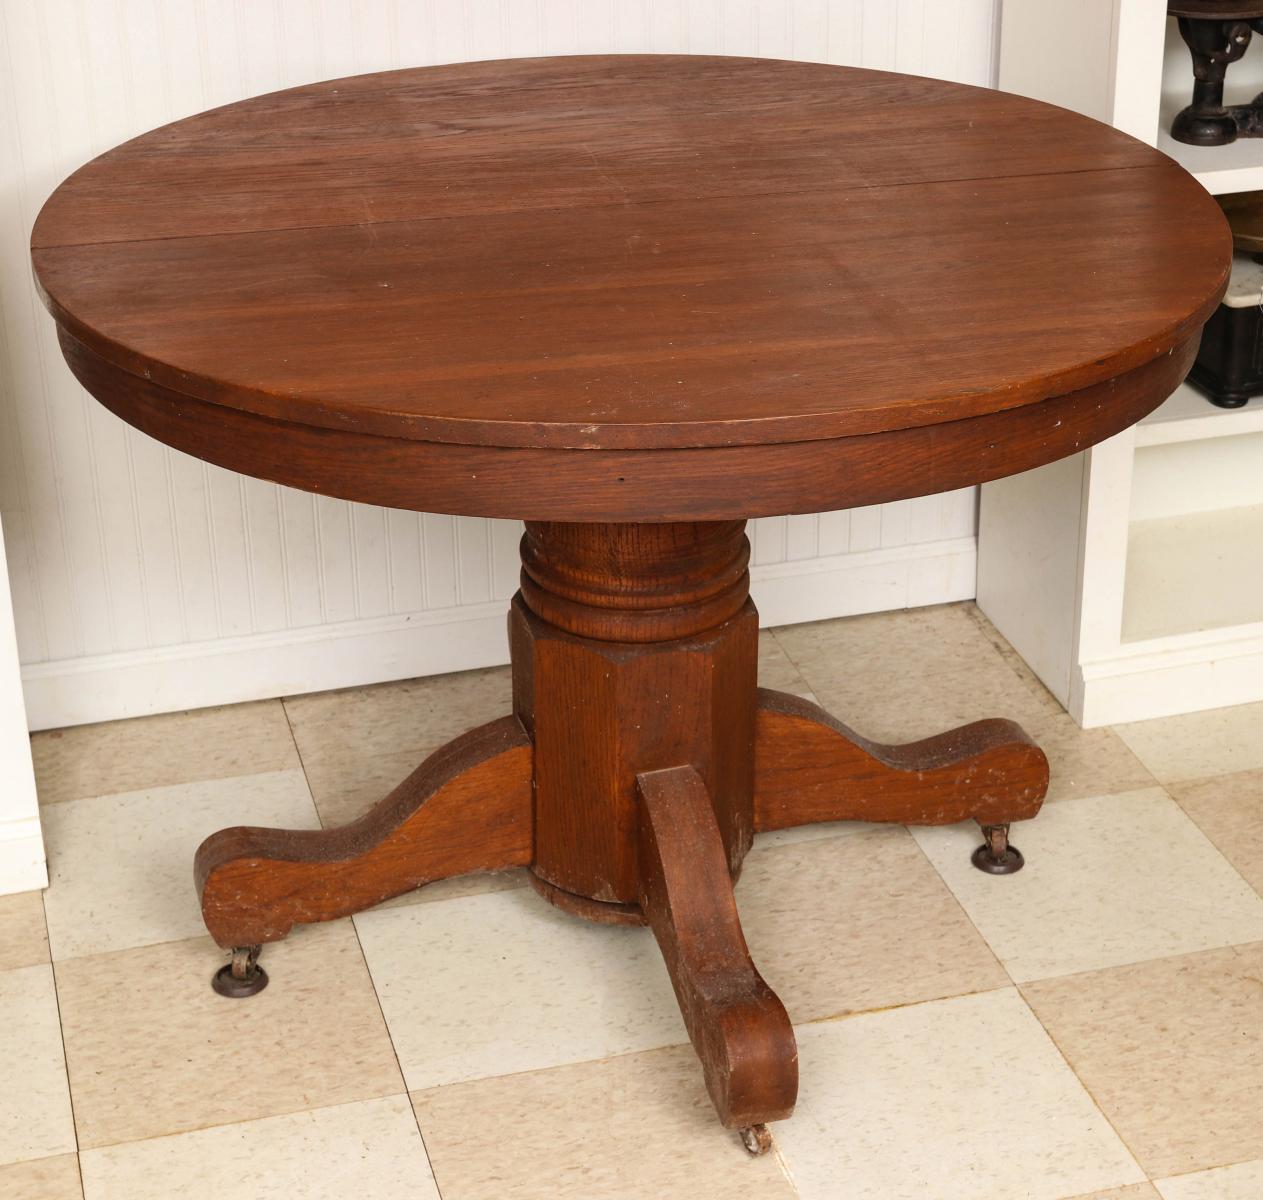 AN EARLY 20TH CENTURY ROUND OAK TABLE.